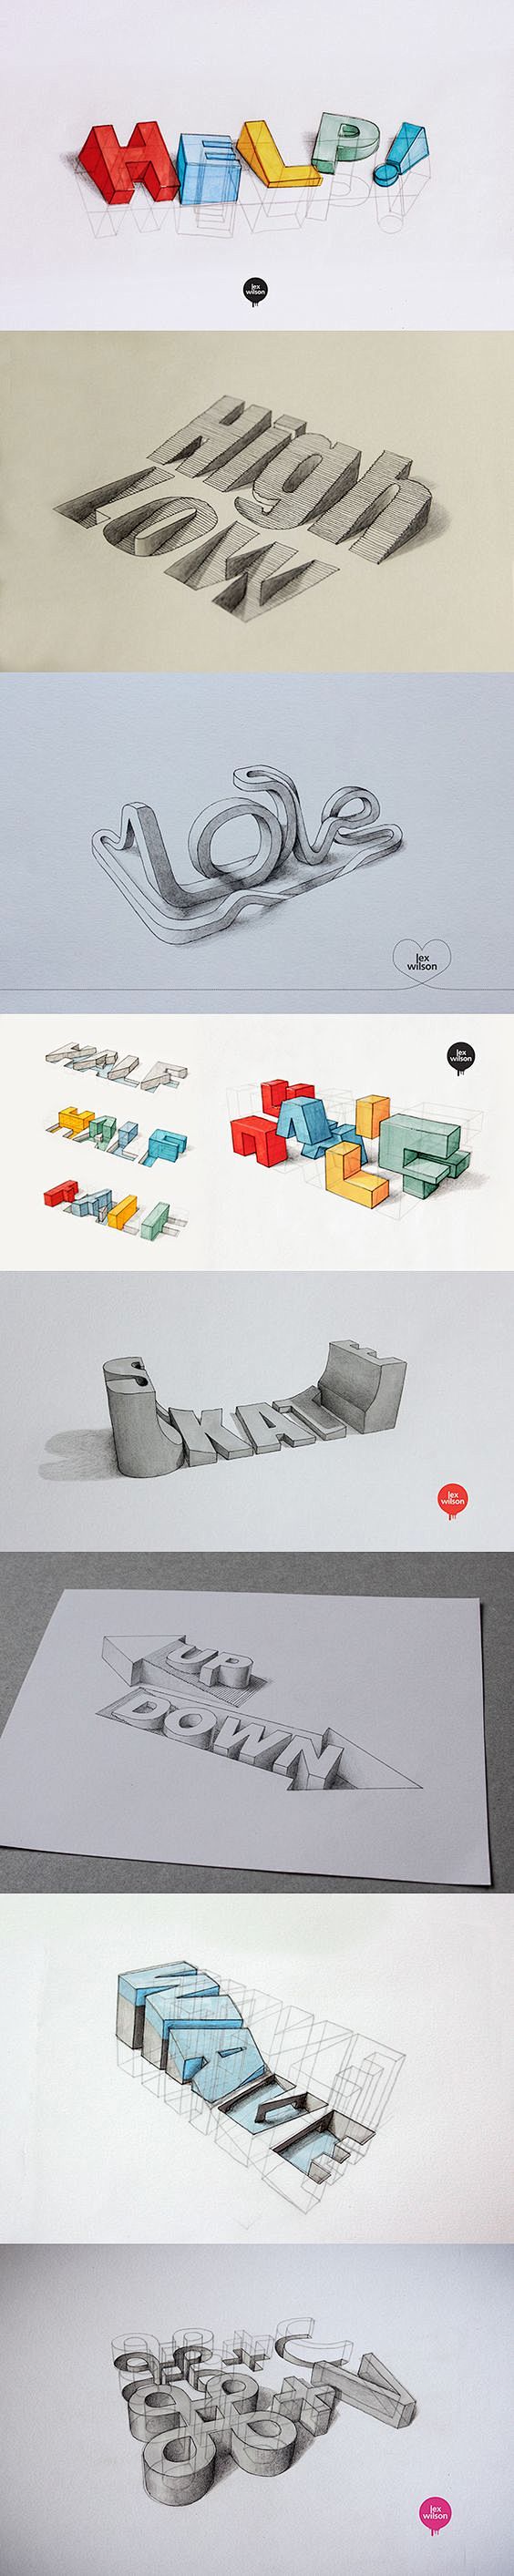 3D Typography by Lex...